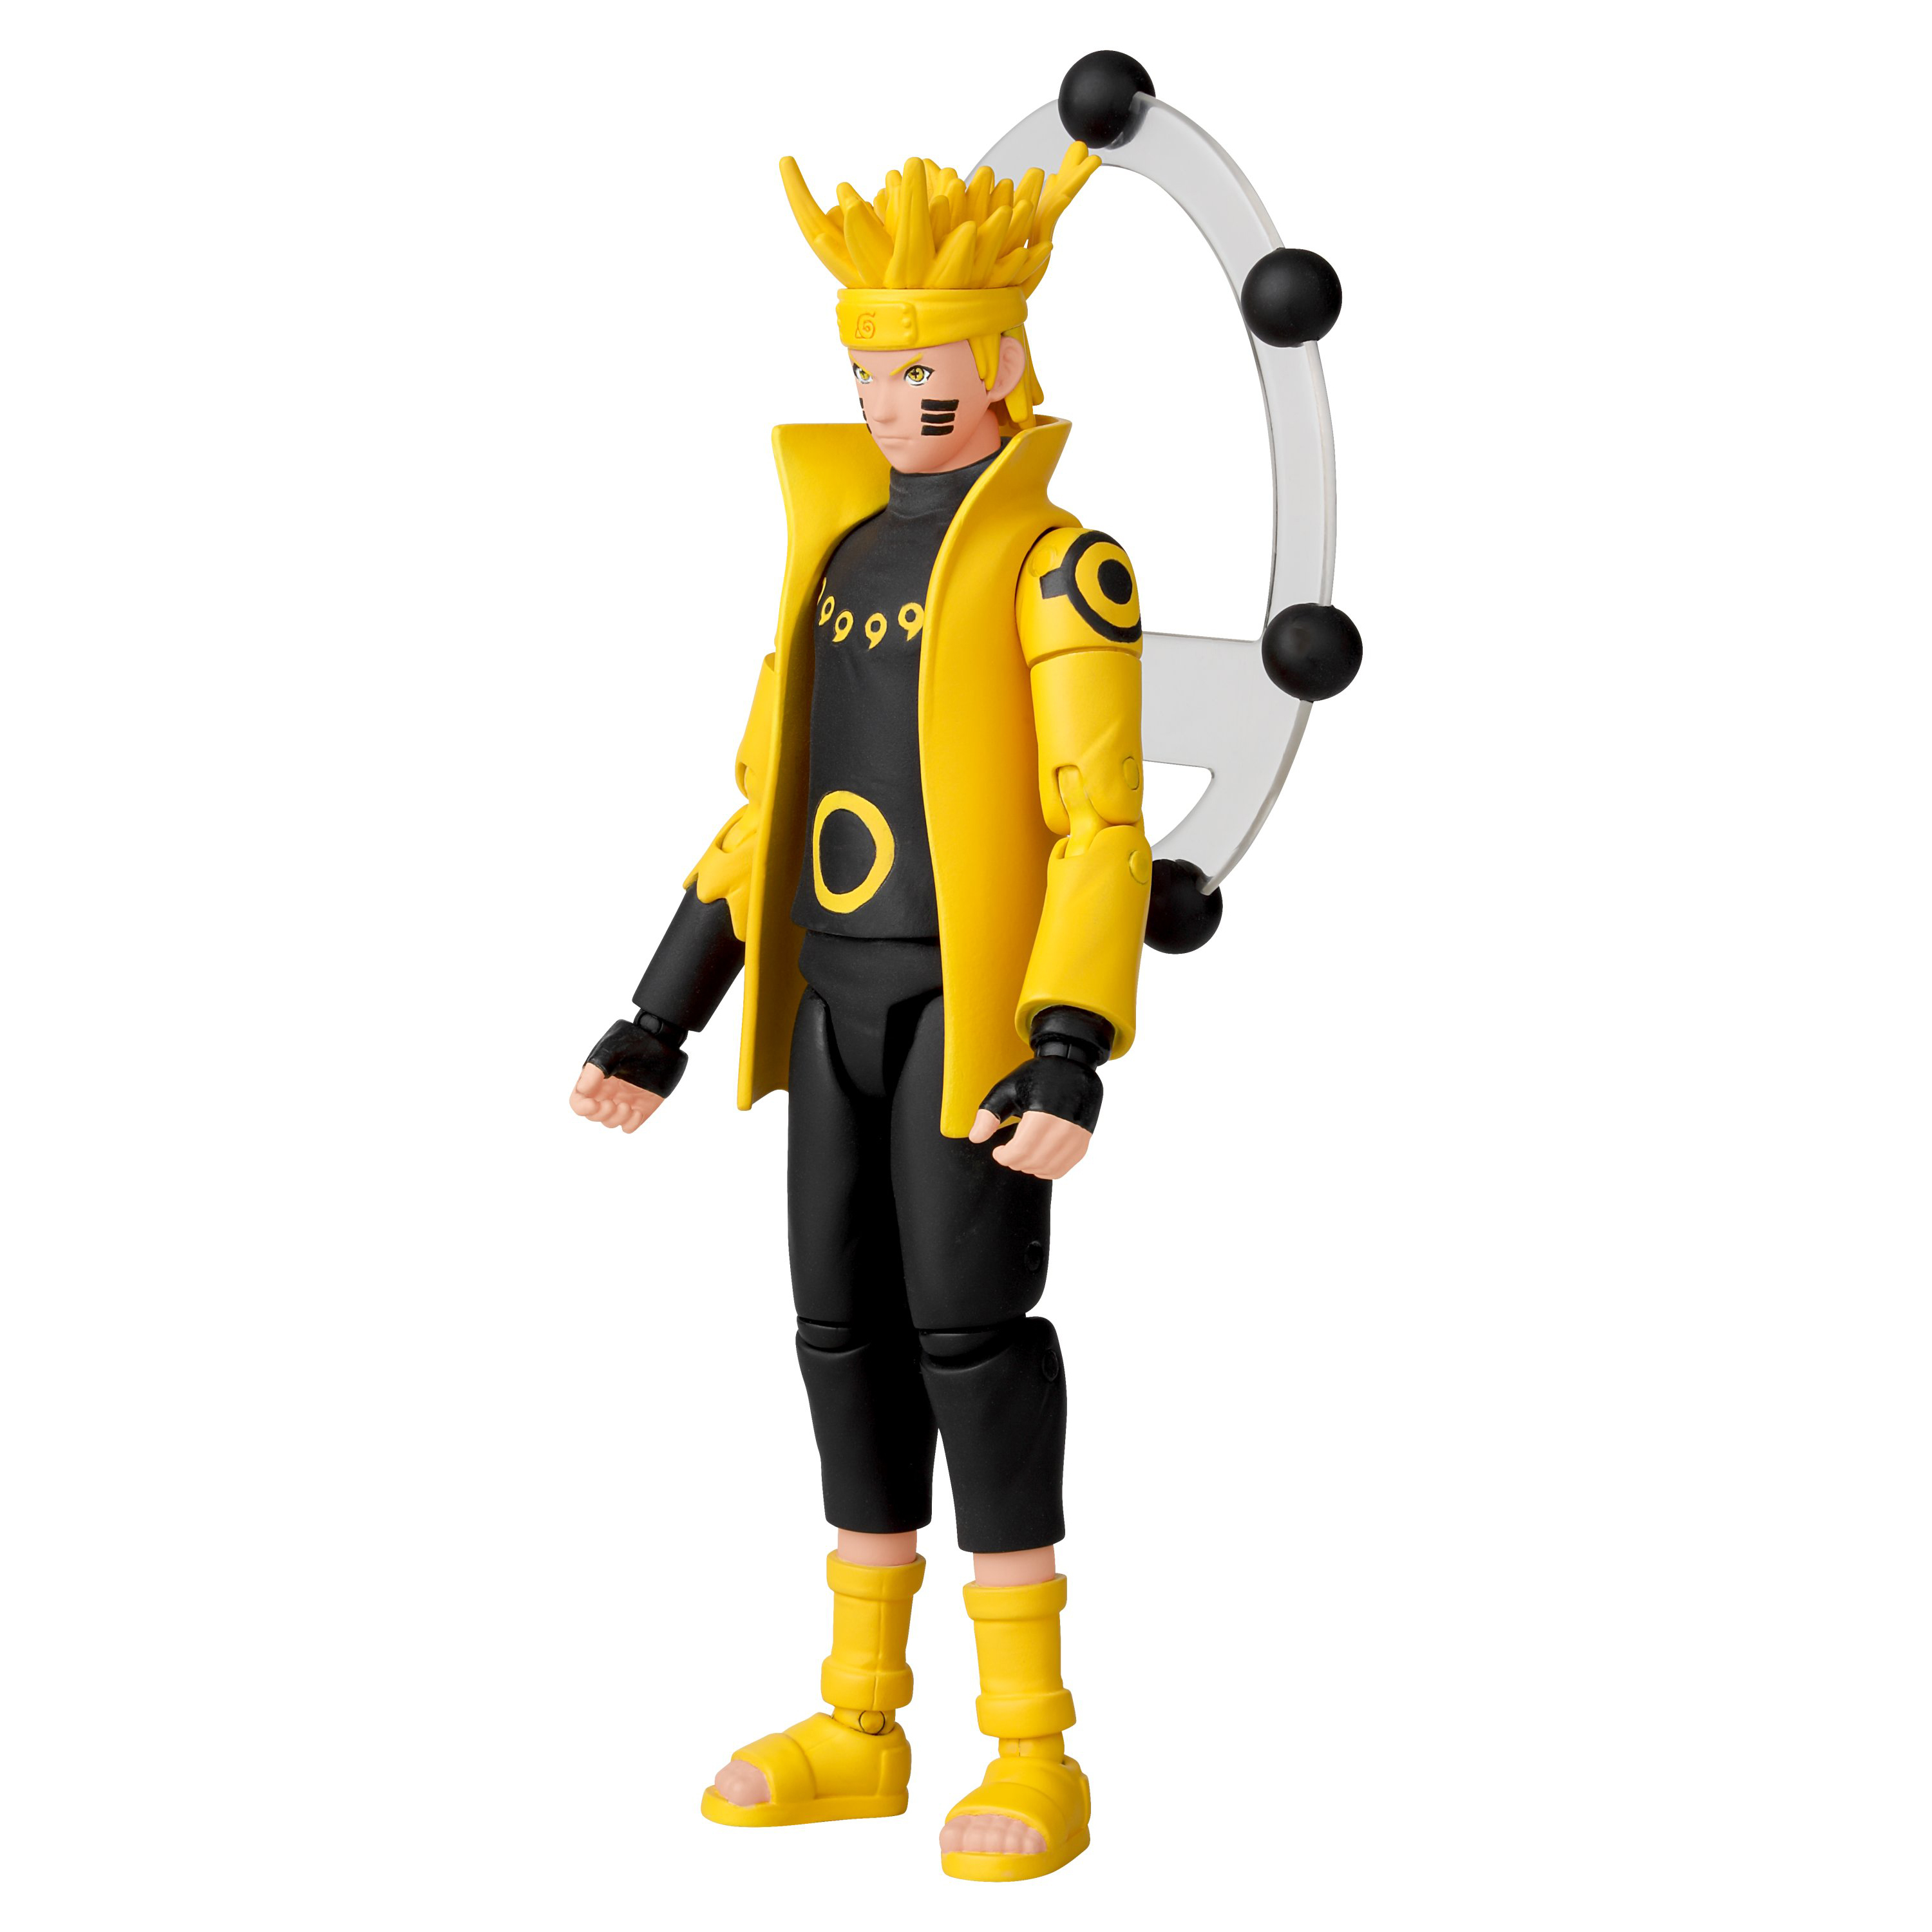 Anime Heroes Official Naruto Shippuden Action FigureNamikaze Minato   Poseable Action Figure  Official Naruto Shippuden Action FigureNamikaze  Minato  Poseable Action Figure  Buy Action figure toys in India shop for